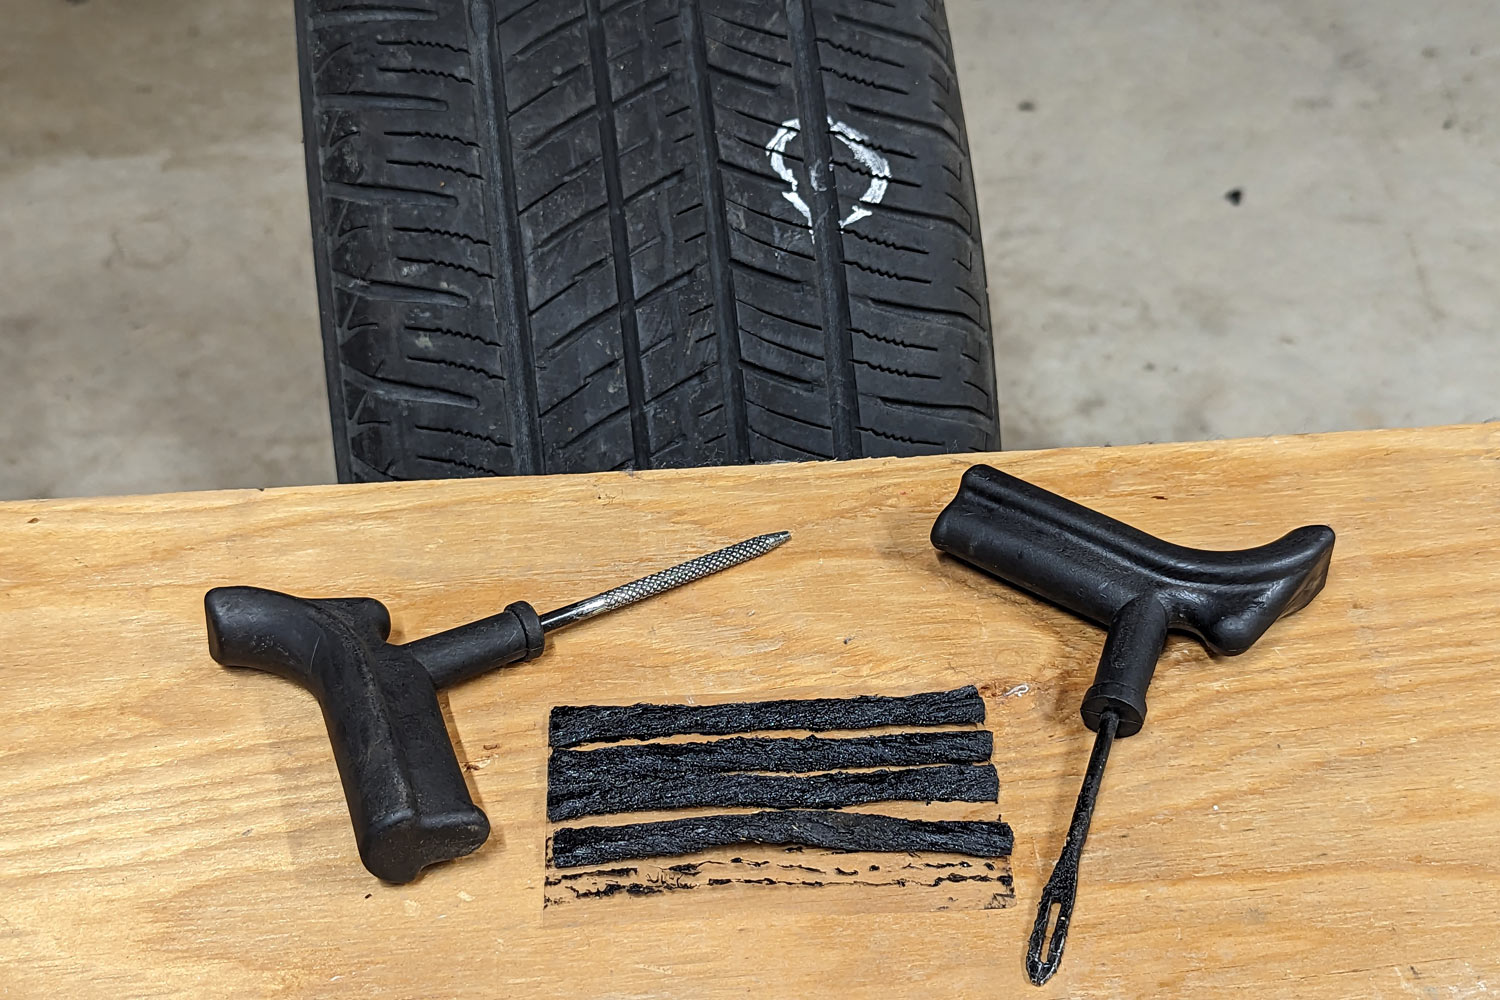 Tire patch kit laid out on workbench next to damaged tire